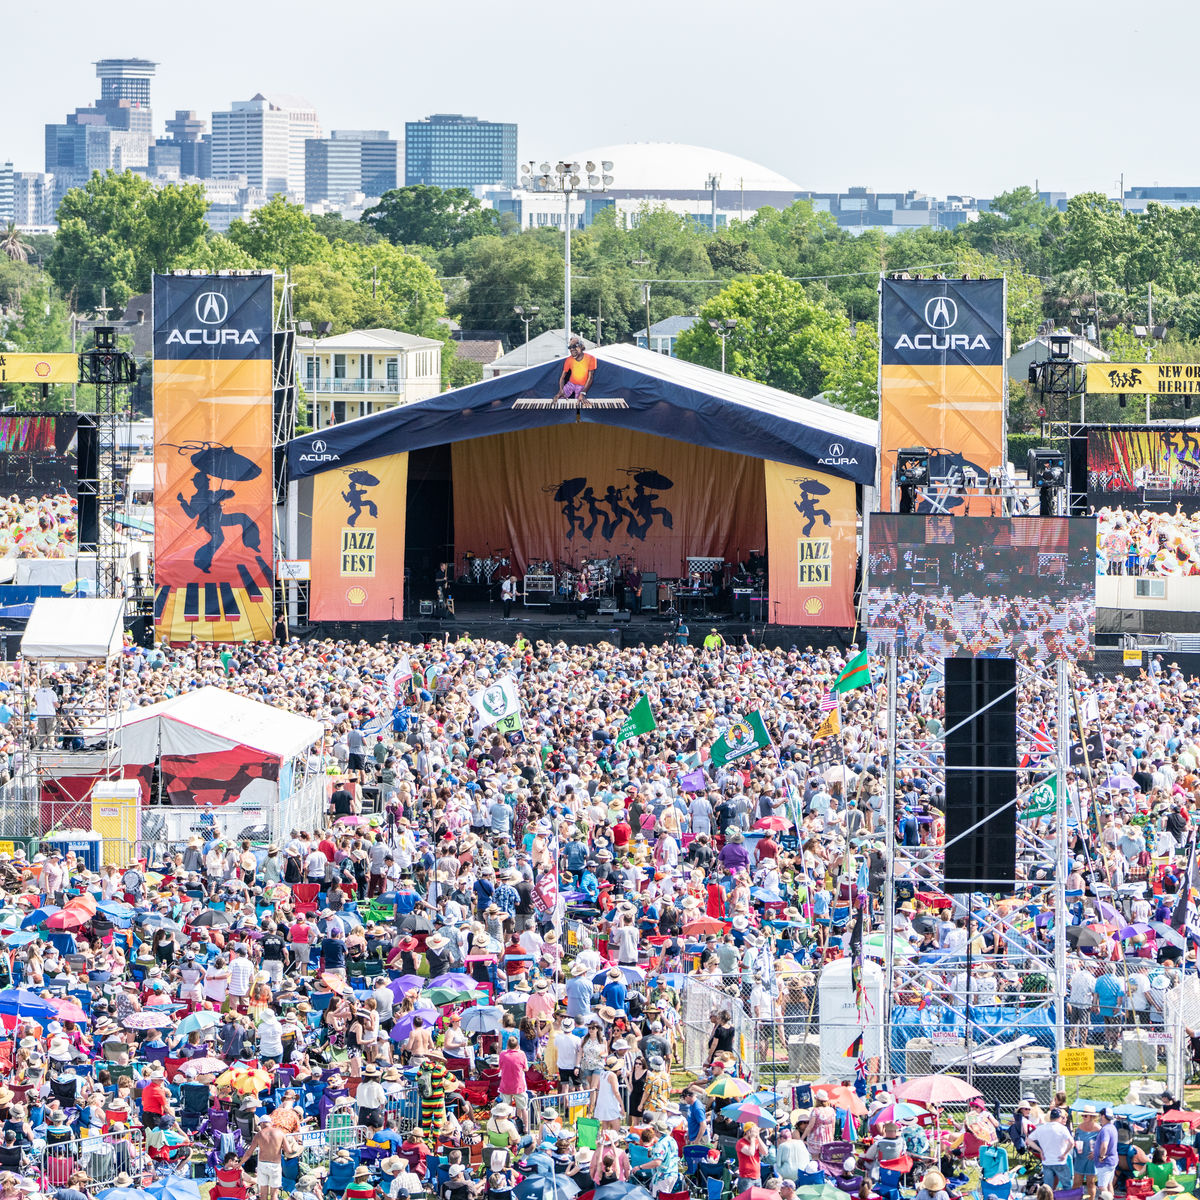 Aerial image of the crowd and stage at the music festival